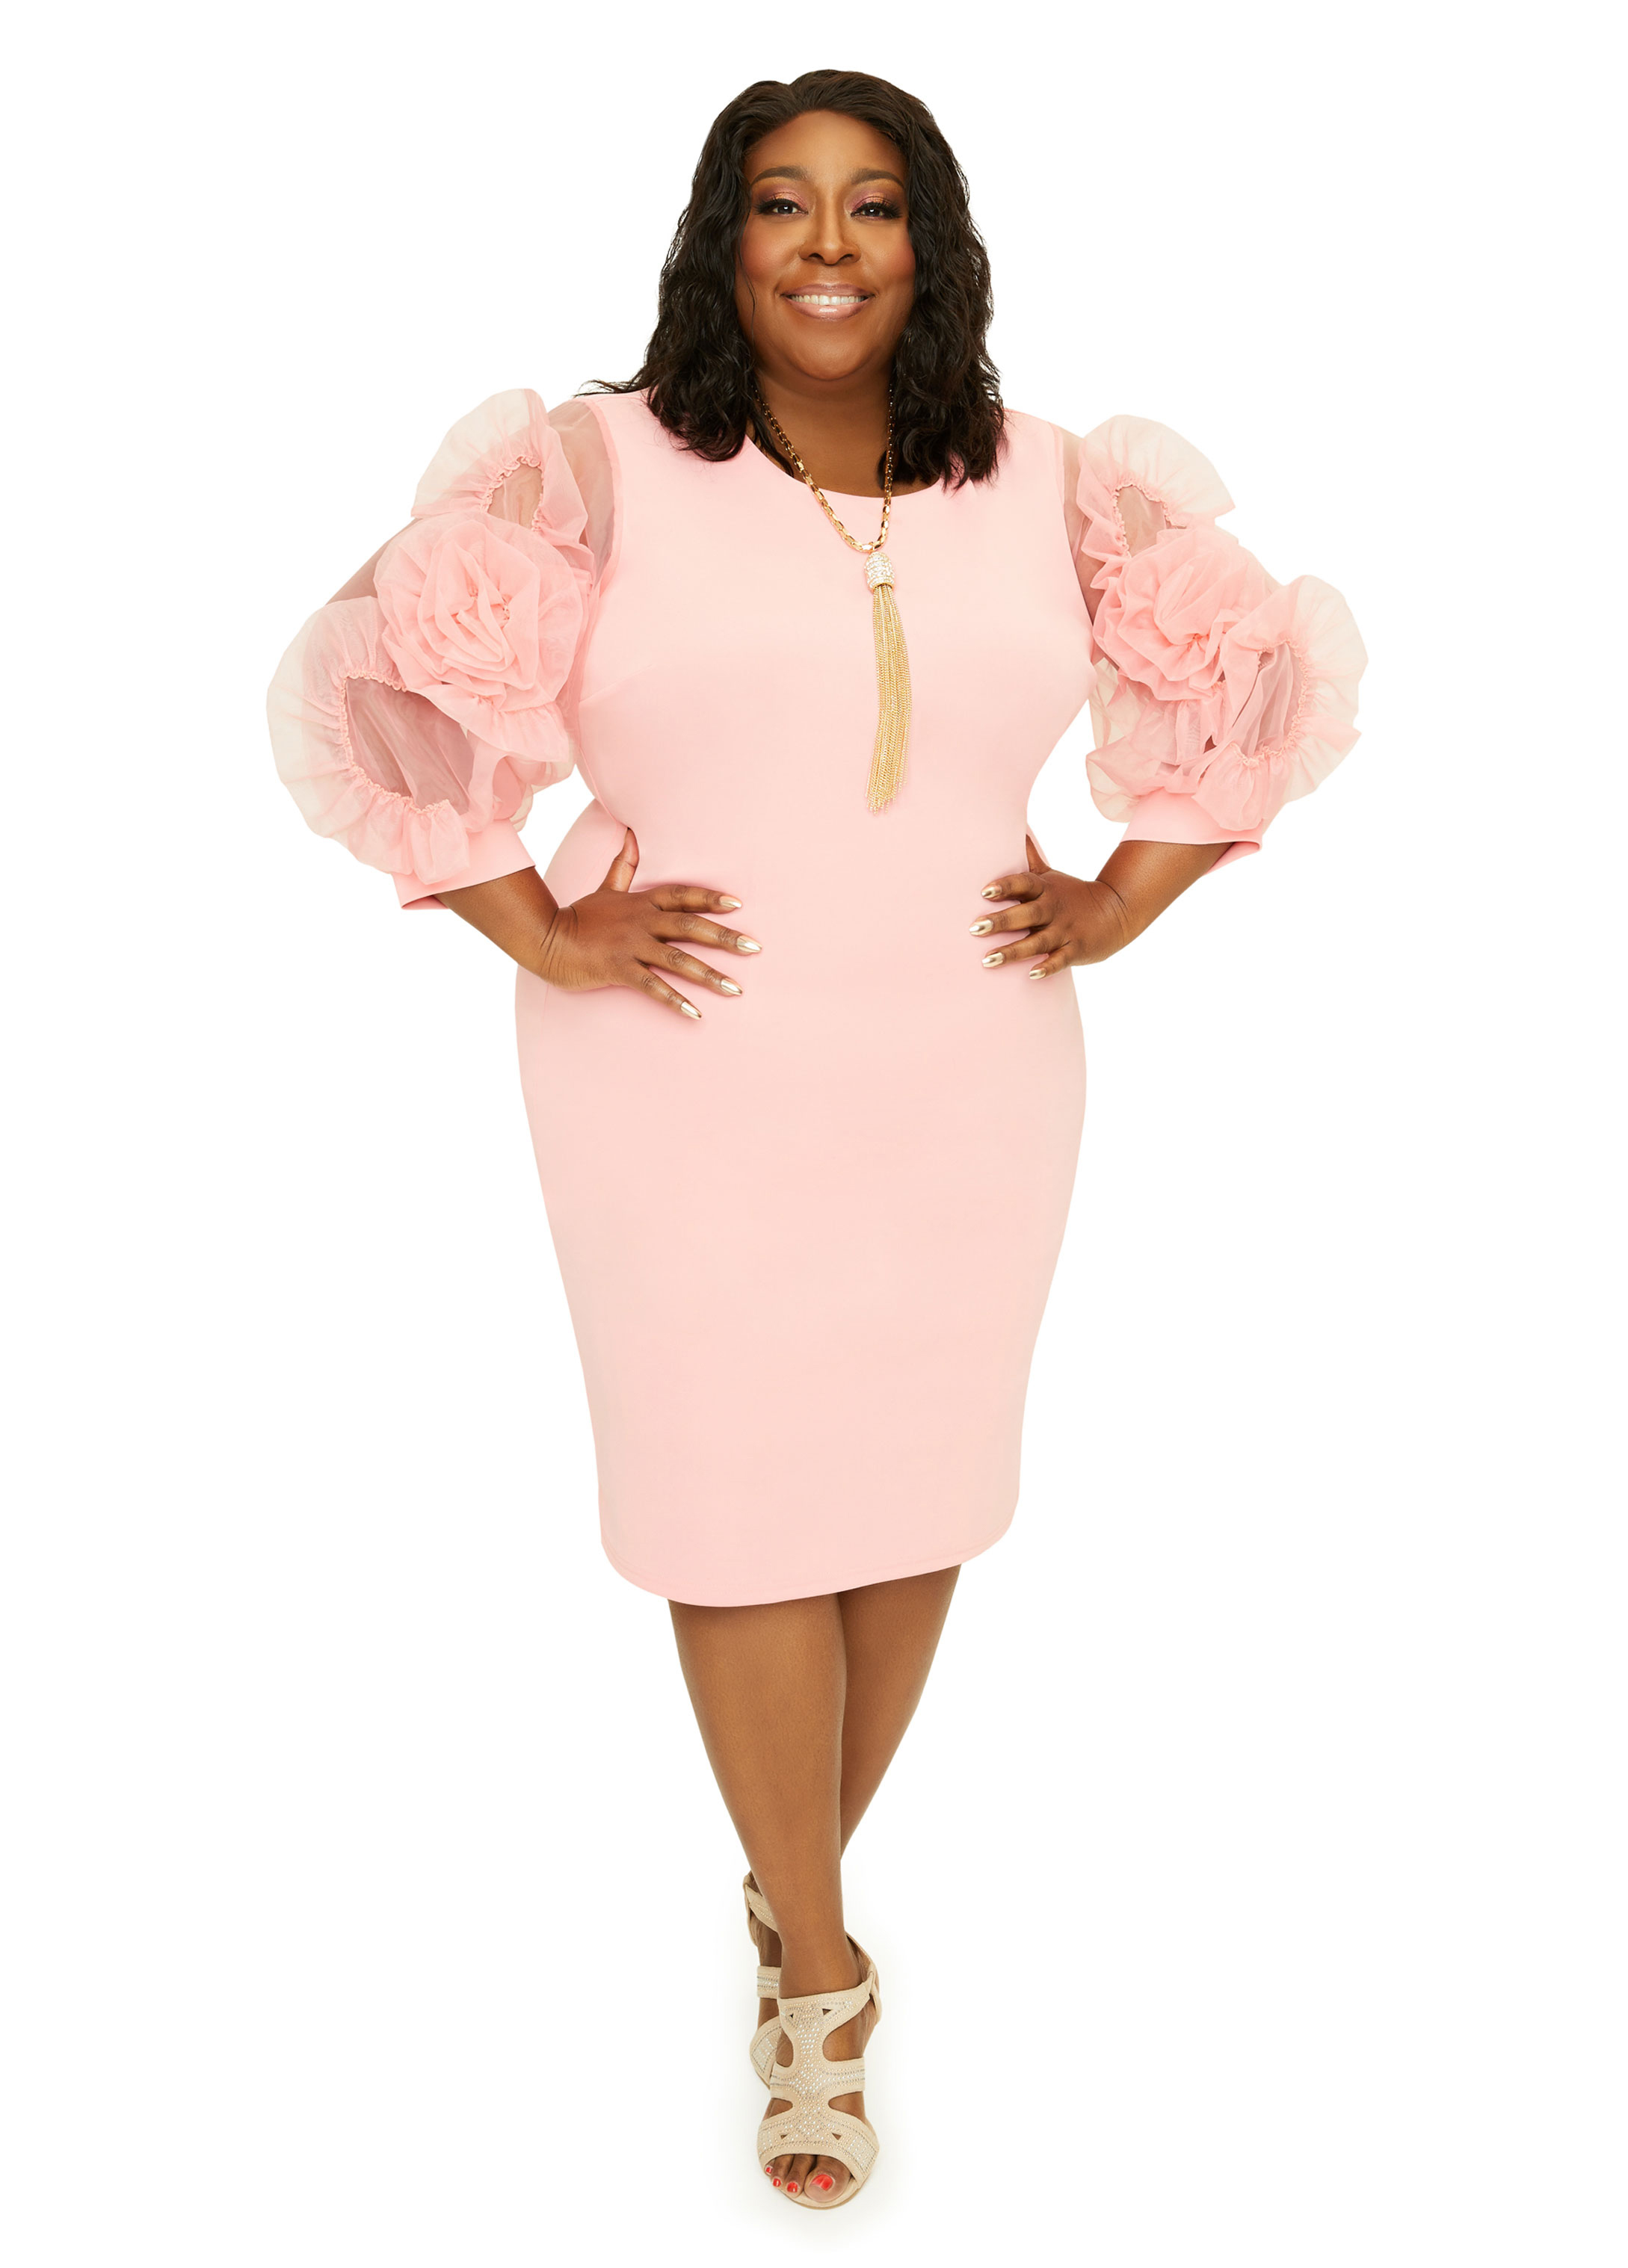 Loni Love's New Ashley Stewart Collection